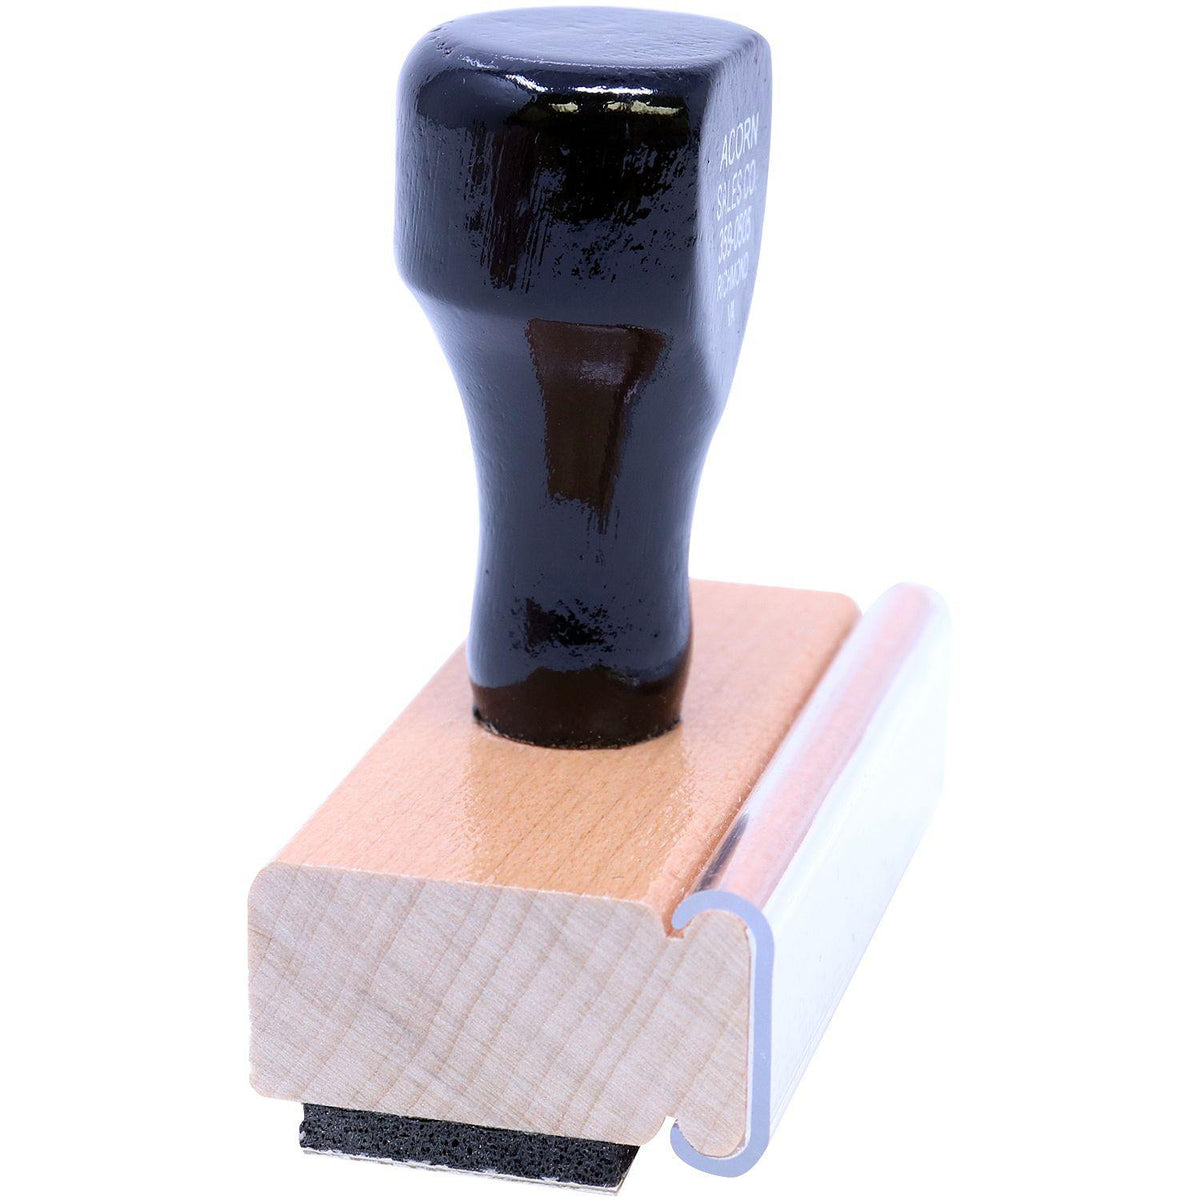 Side View of Bc Bs Rubber Medical Provider Rubber Stamp at an Angle